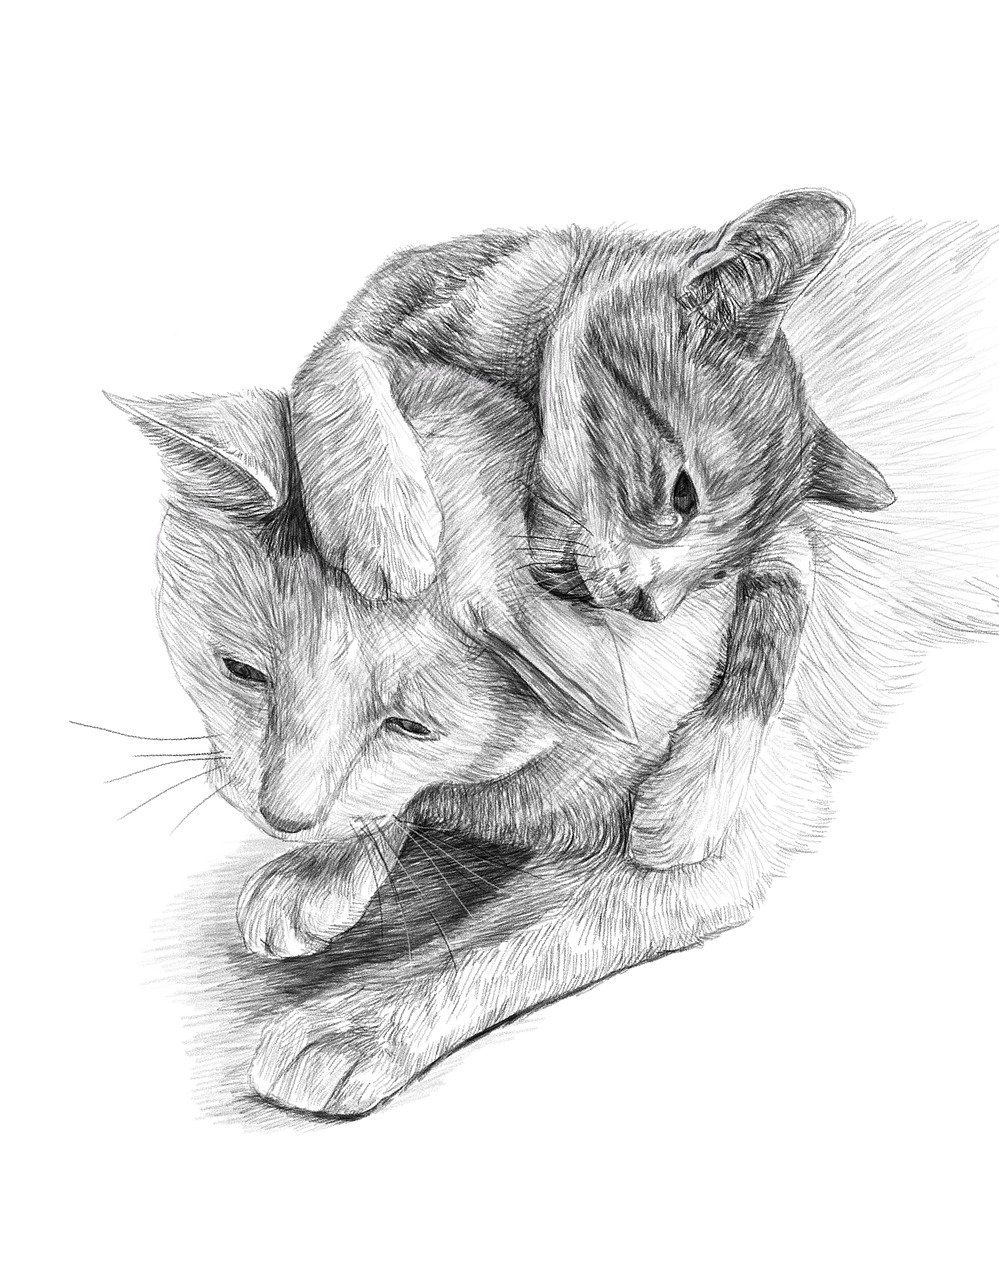 a black and white drawing of a cat and a dog, a drawing, by Martina Krupičková, shutterstock, furry art, nicolas delort, realistic detail, portfolio illustration, kittens